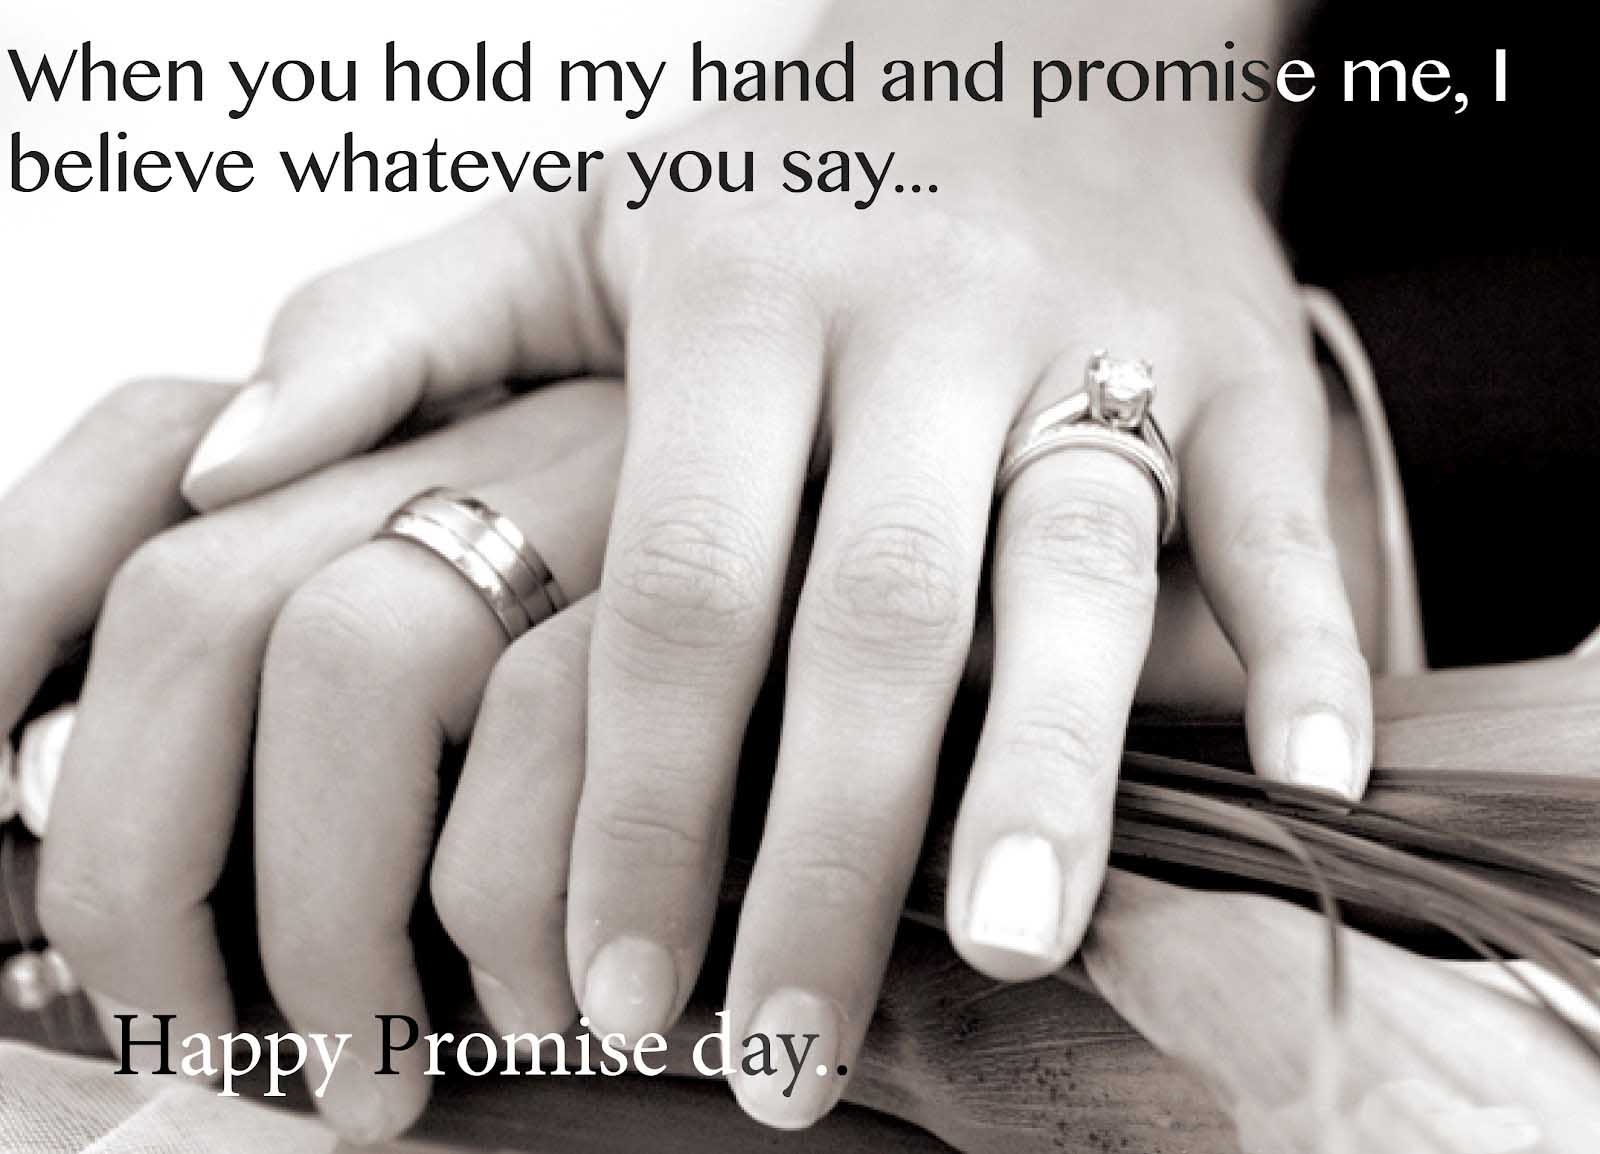 Happy Promise Day Image, Pics, Photo & Wallpaper 2020 HD